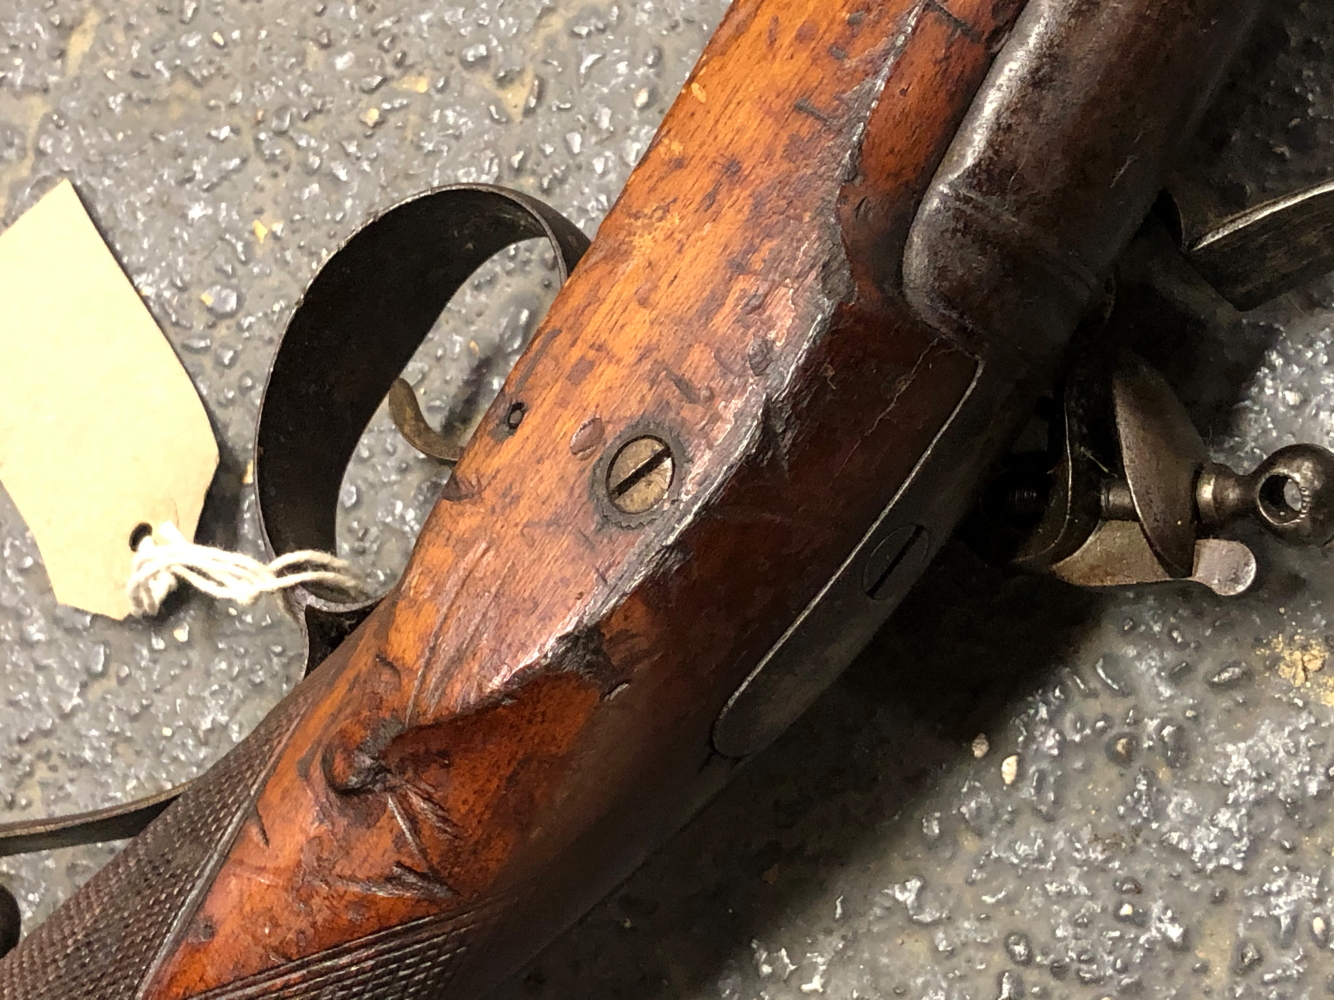 AN EAST INDIA COMPANY FLINTLOCK MUSKET, 39 INCH BARREL, BEVELLED LOCK WITH RAMPANT LION EMBLEM, FULL - Image 15 of 16